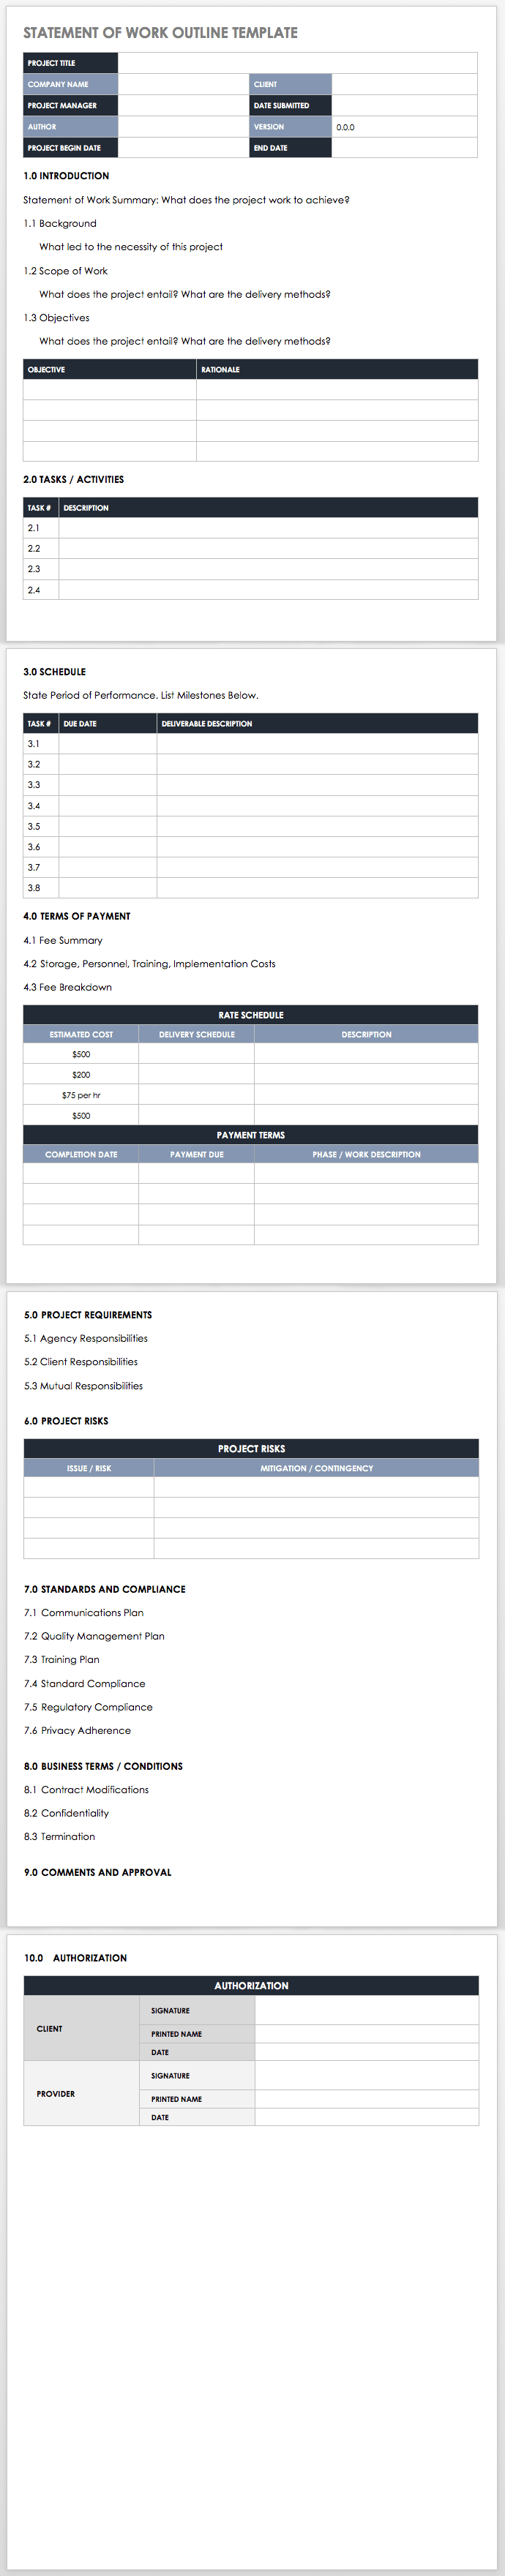 As Is Document Template from www.smartsheet.com